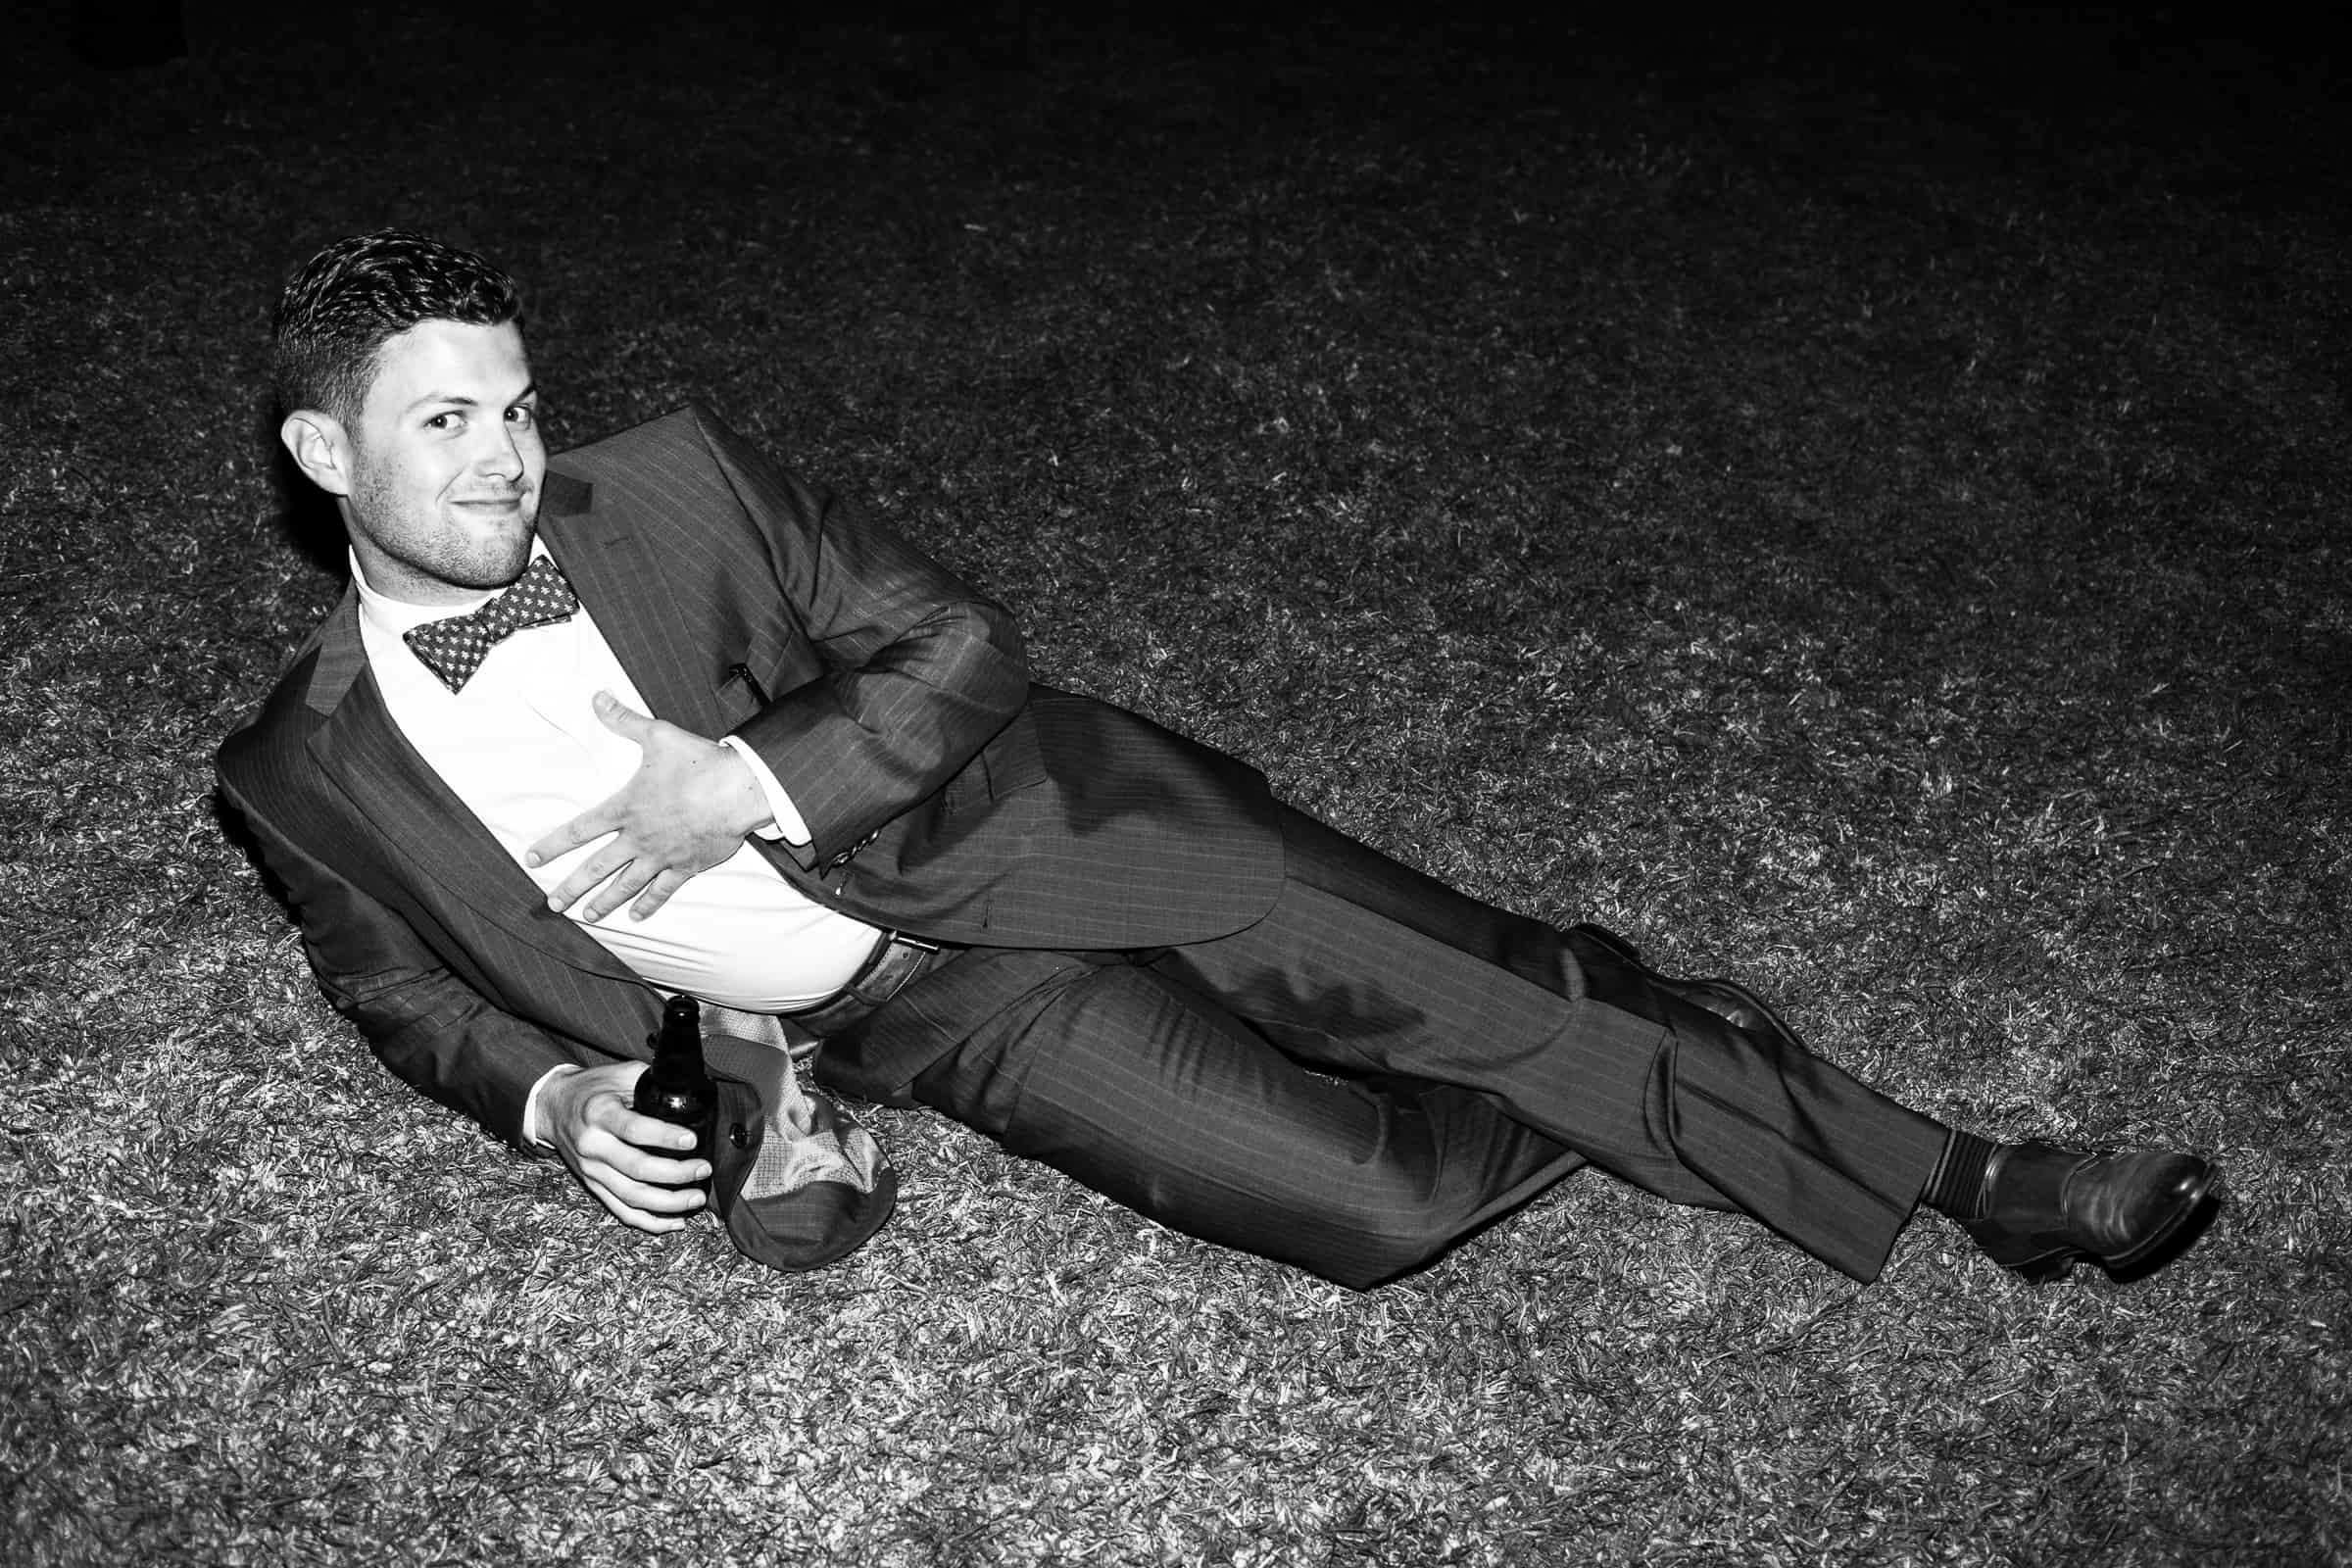 man with bow tie lying down in the grass doing funny pose and drinking a beer